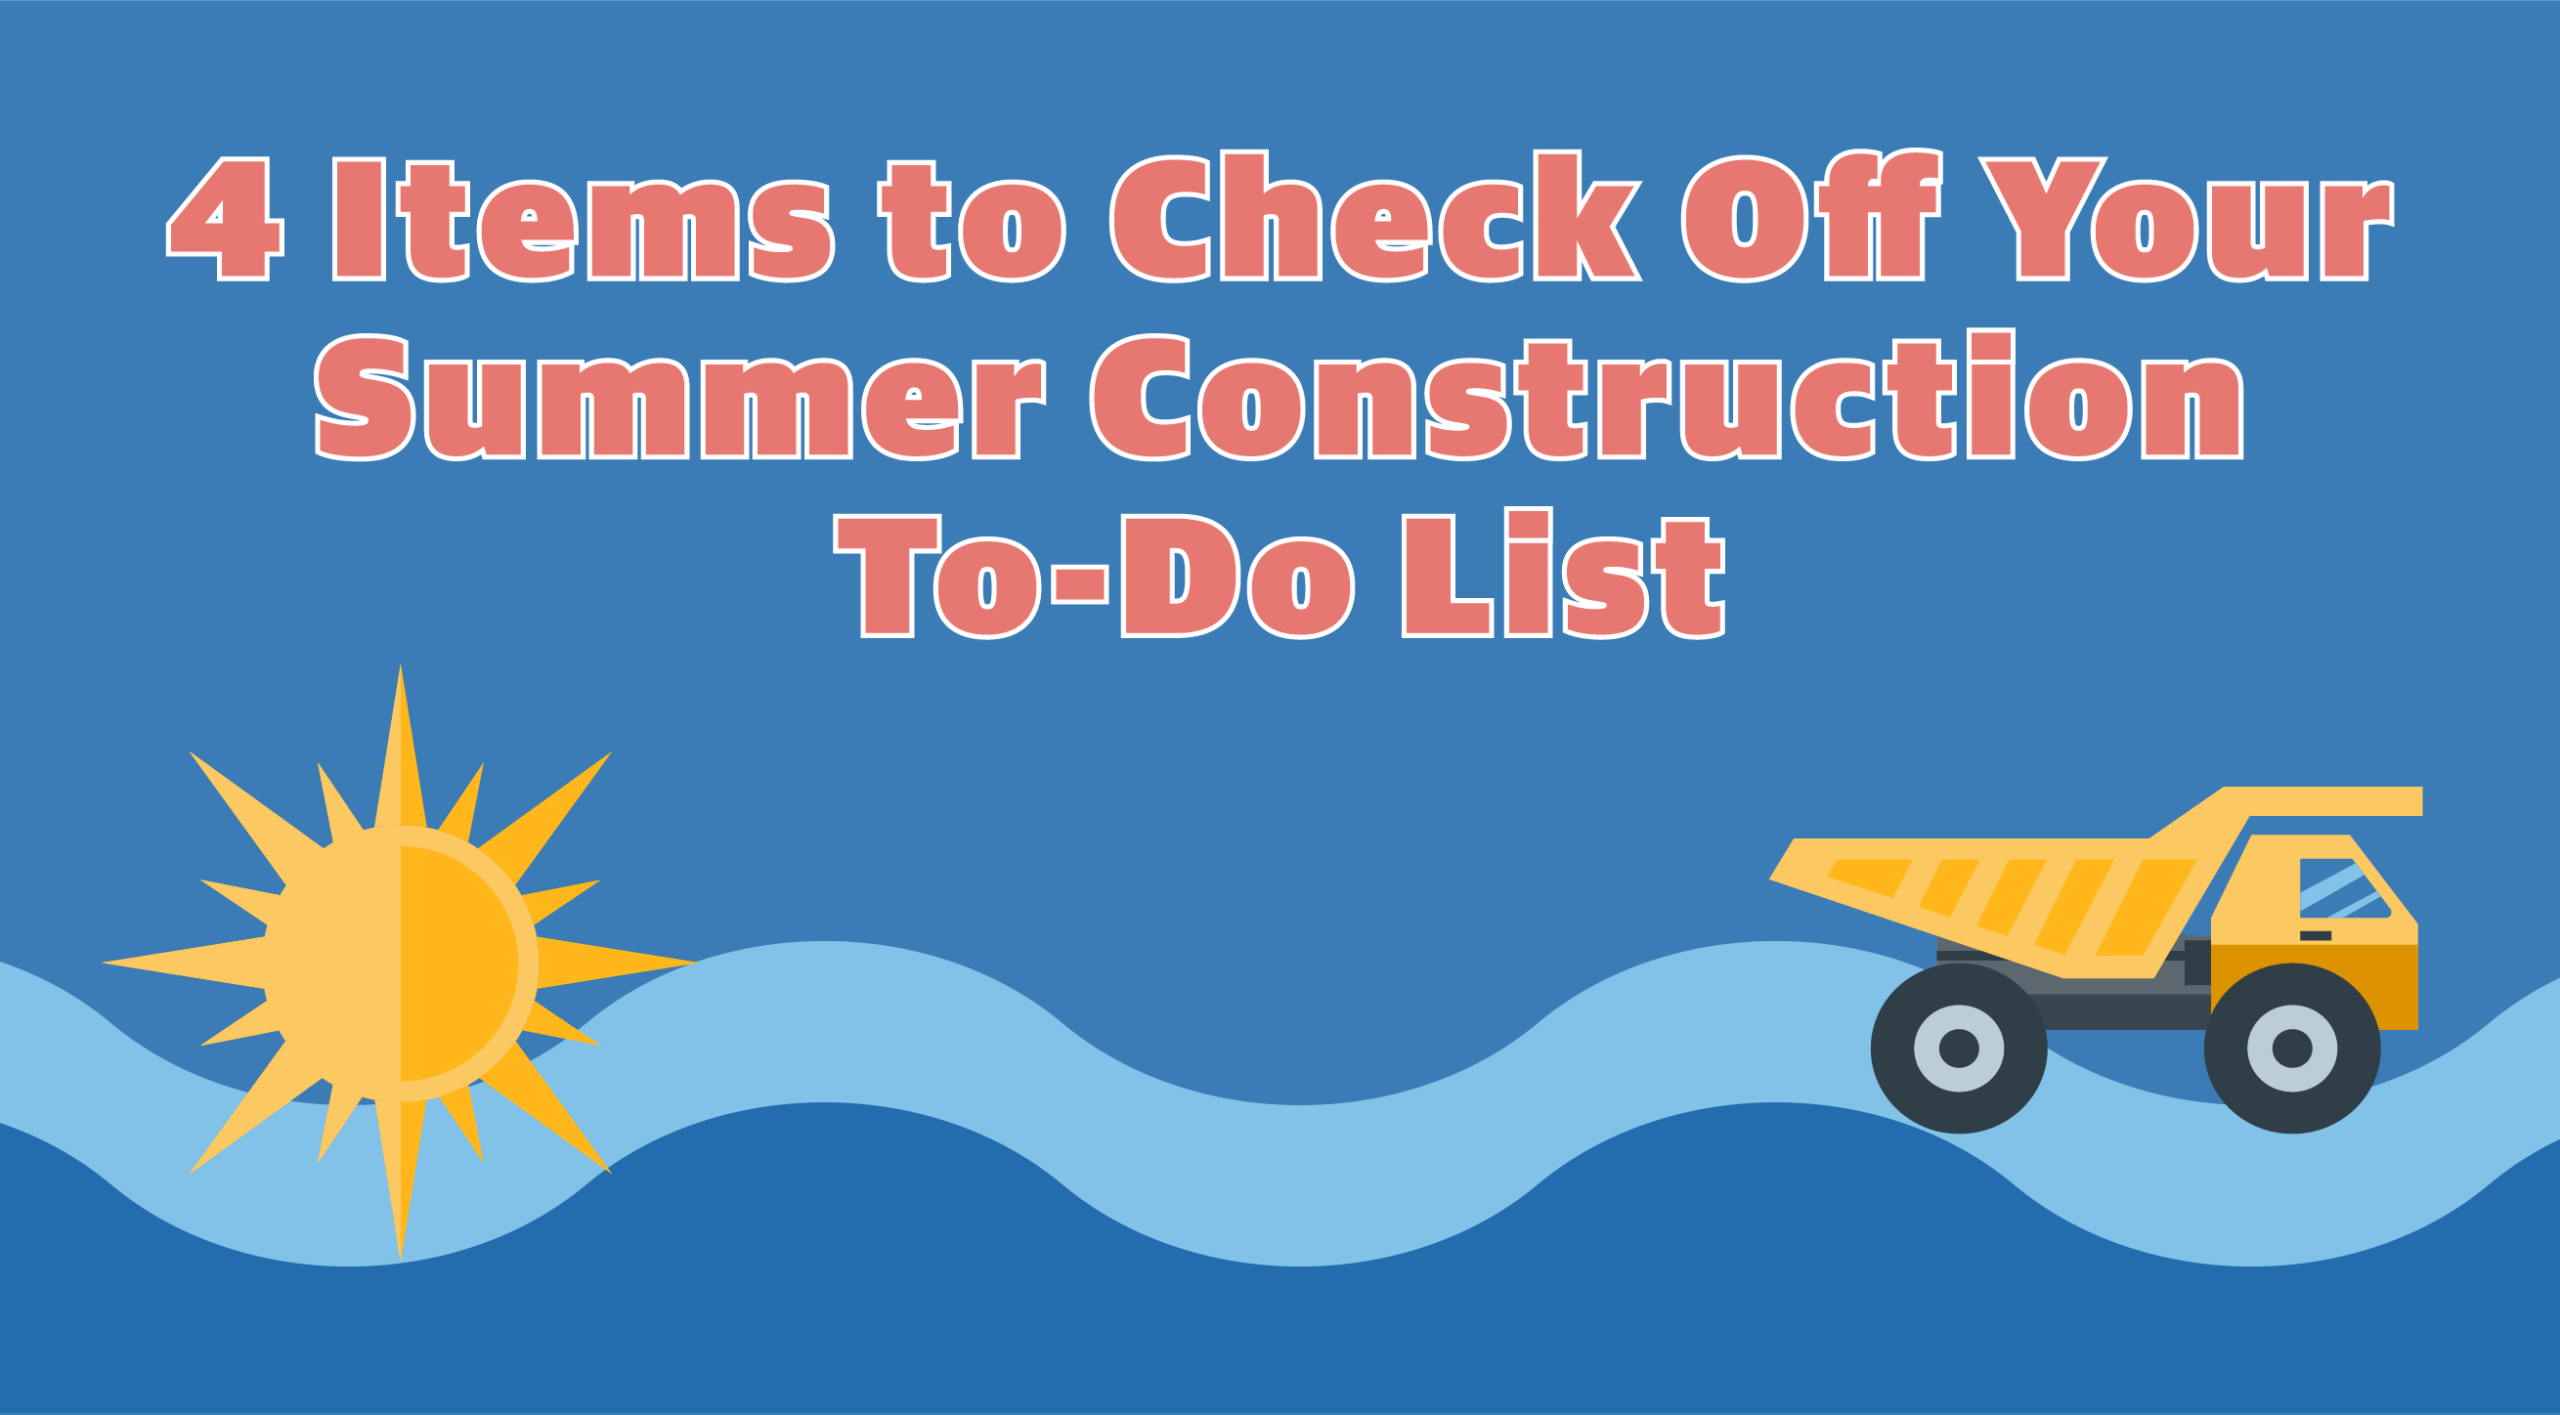 4 Important Items to Check Off Your Summer Construction To-Do List 2